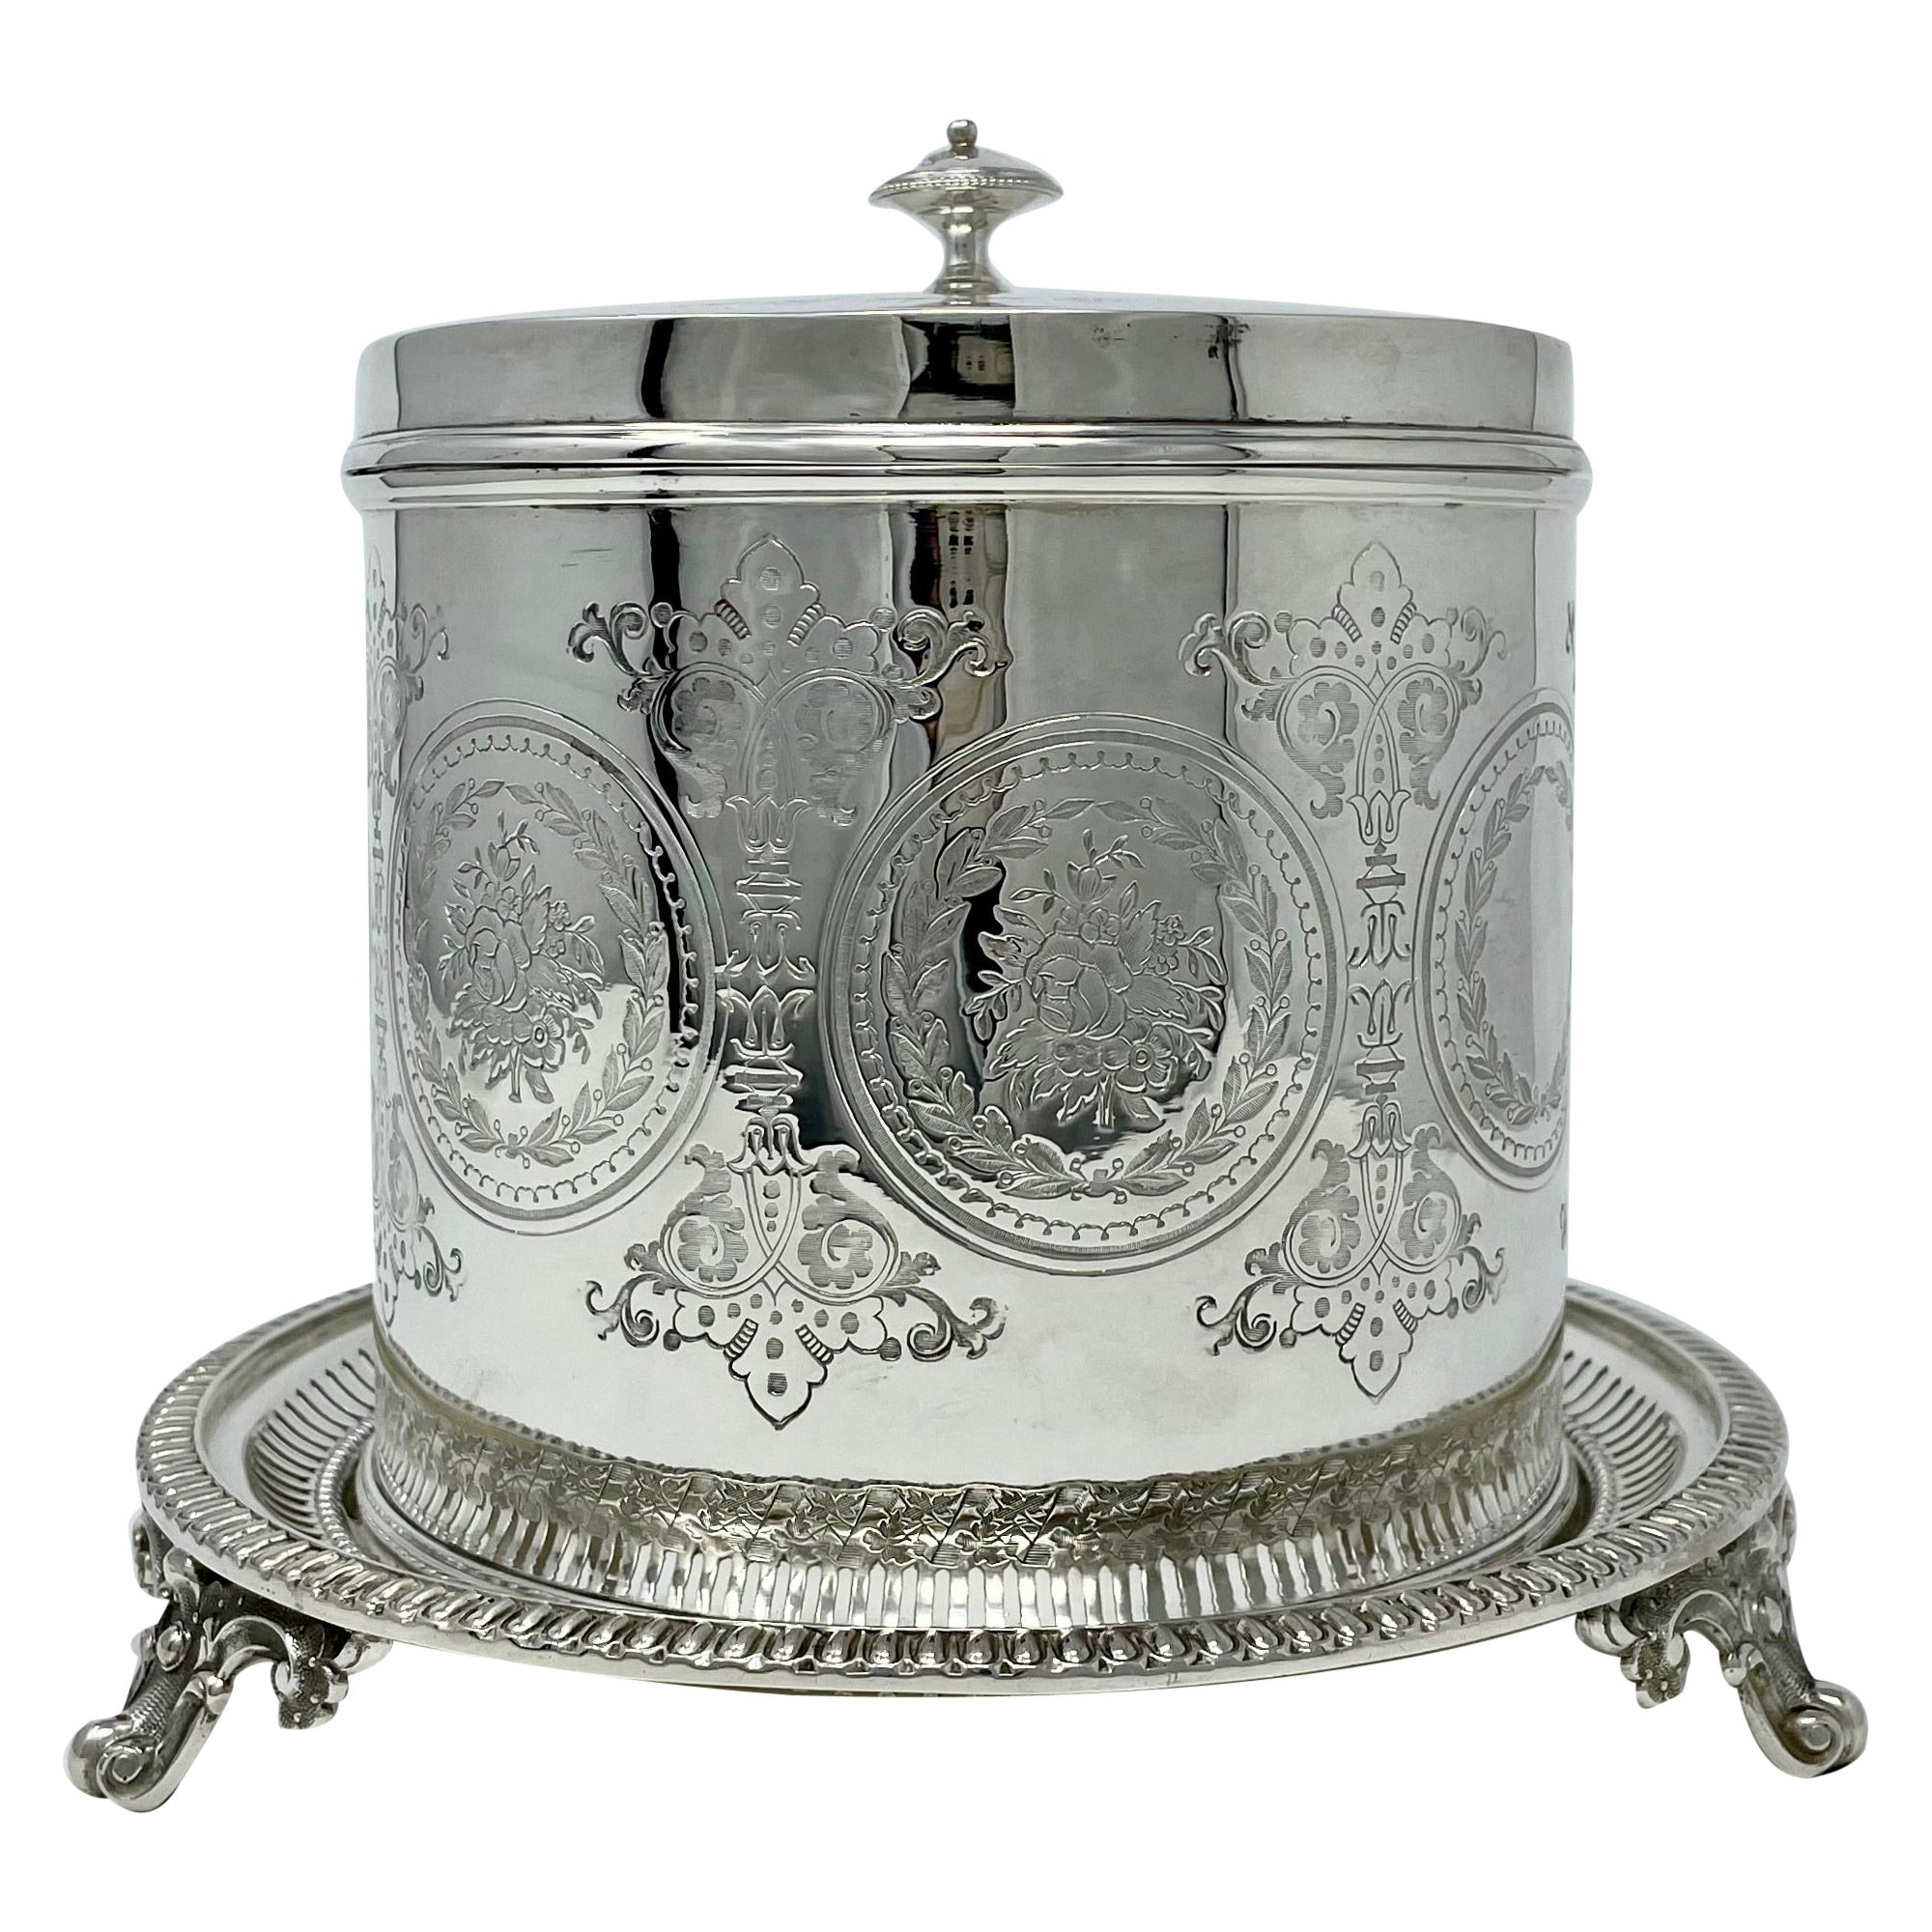 Antique English Silver Plate Biscuit Box, circa 1880